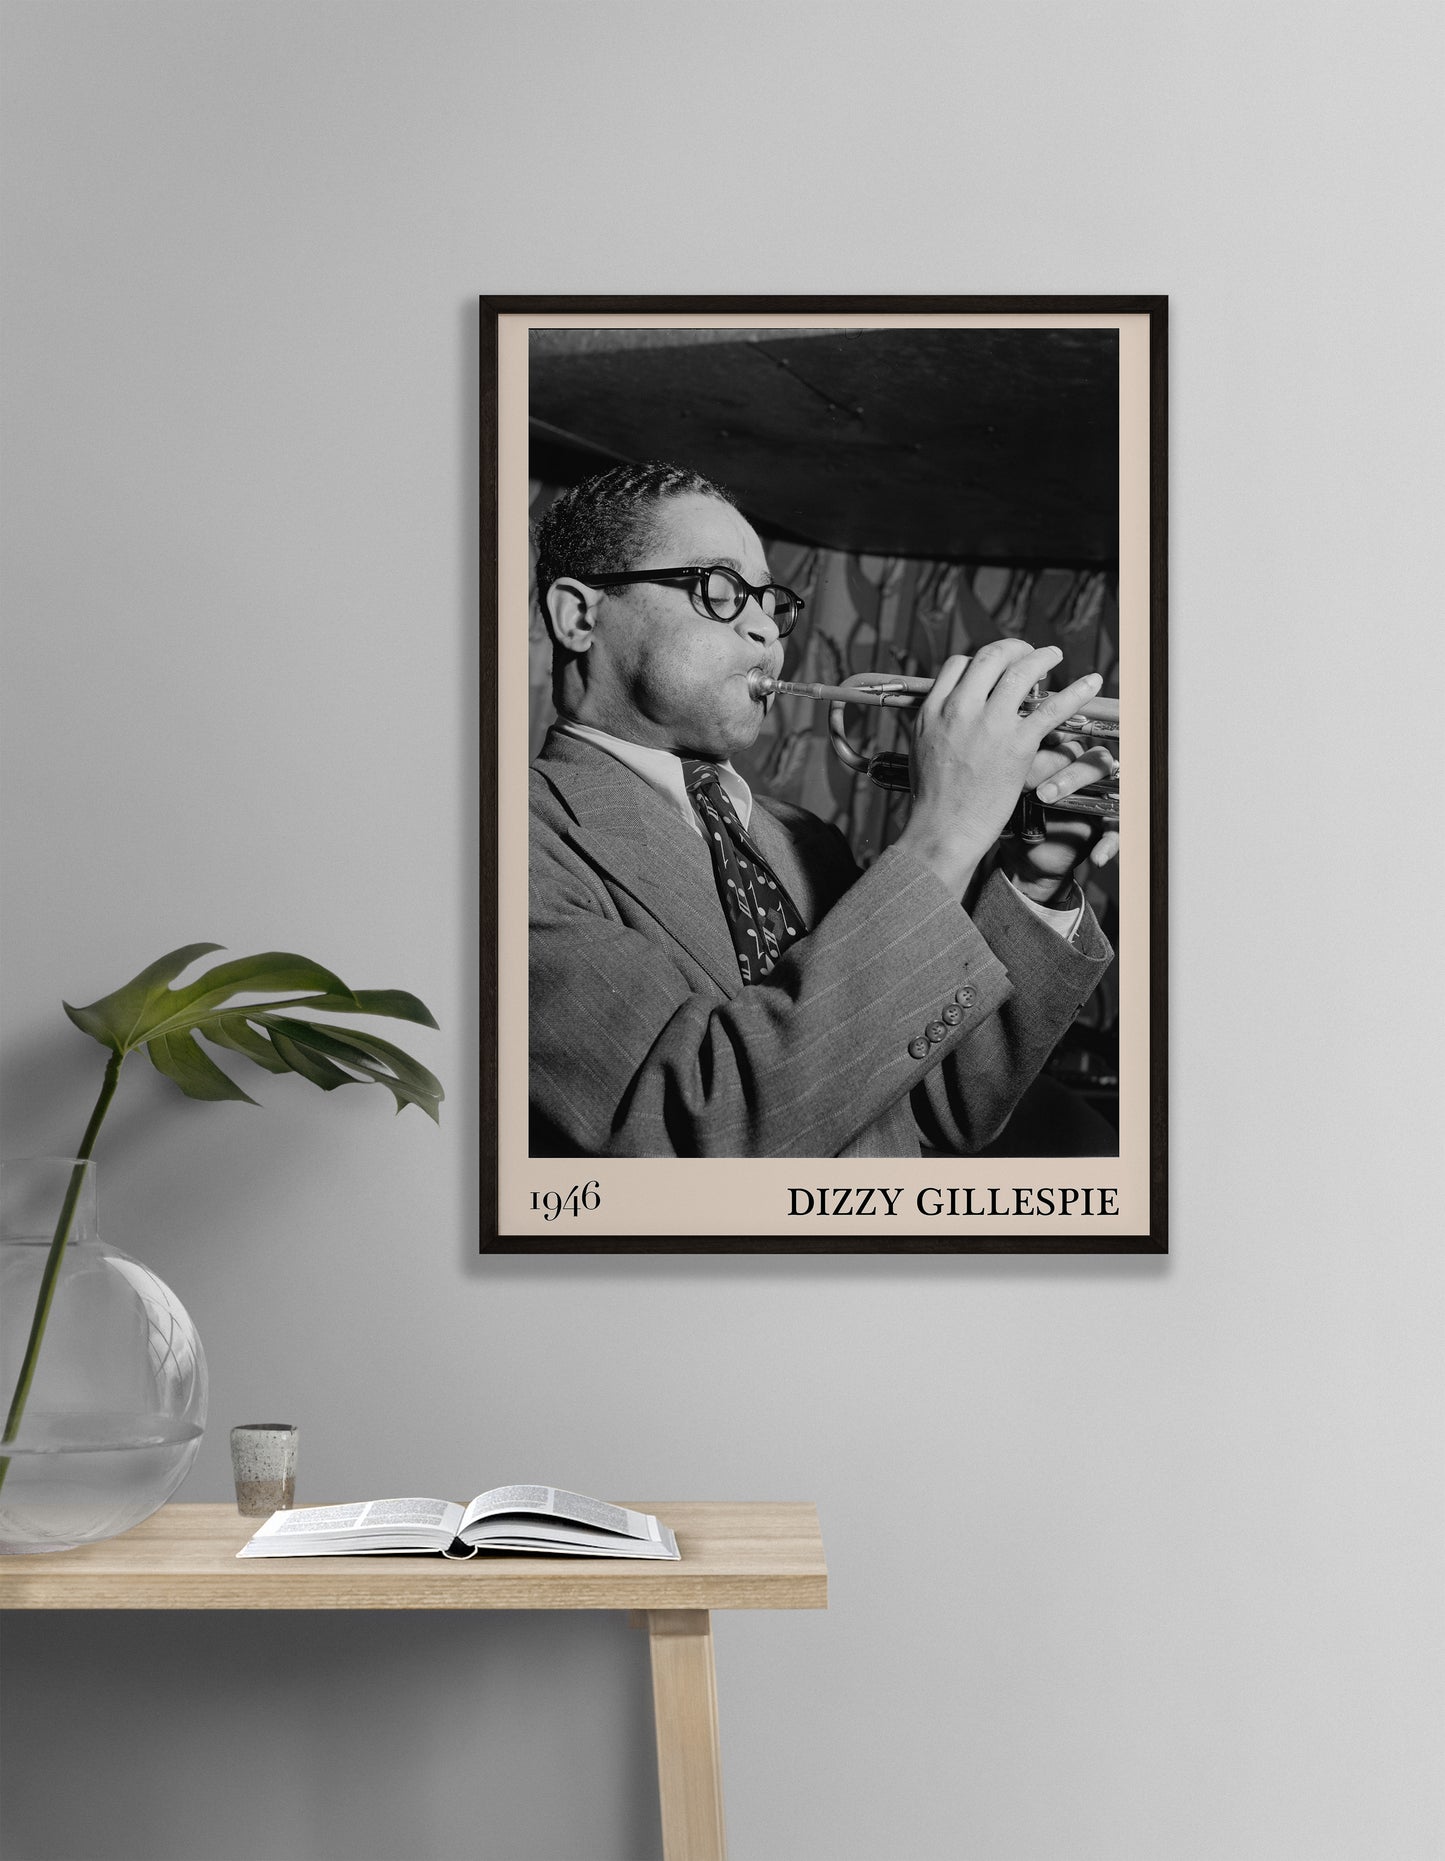 Cool 1946 photo of Dizzy Gillespie crafted into black framed jazz poster, hanging on a living room wall